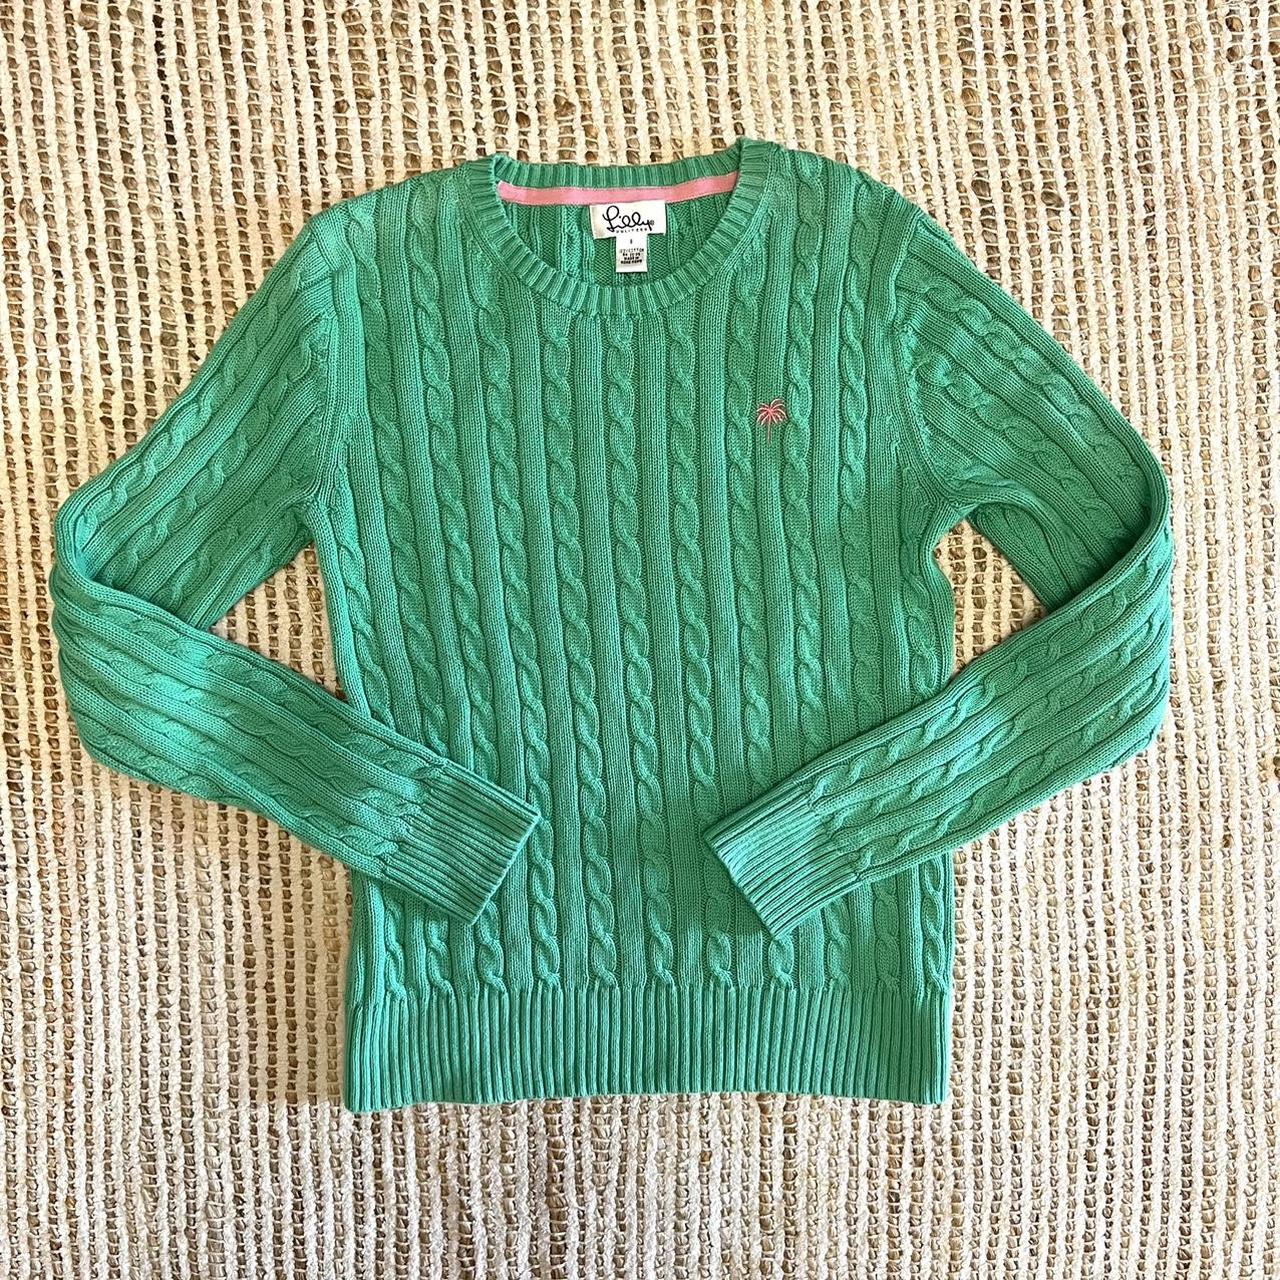 Lilly Pulitzer Women's Pink and Green Jumper